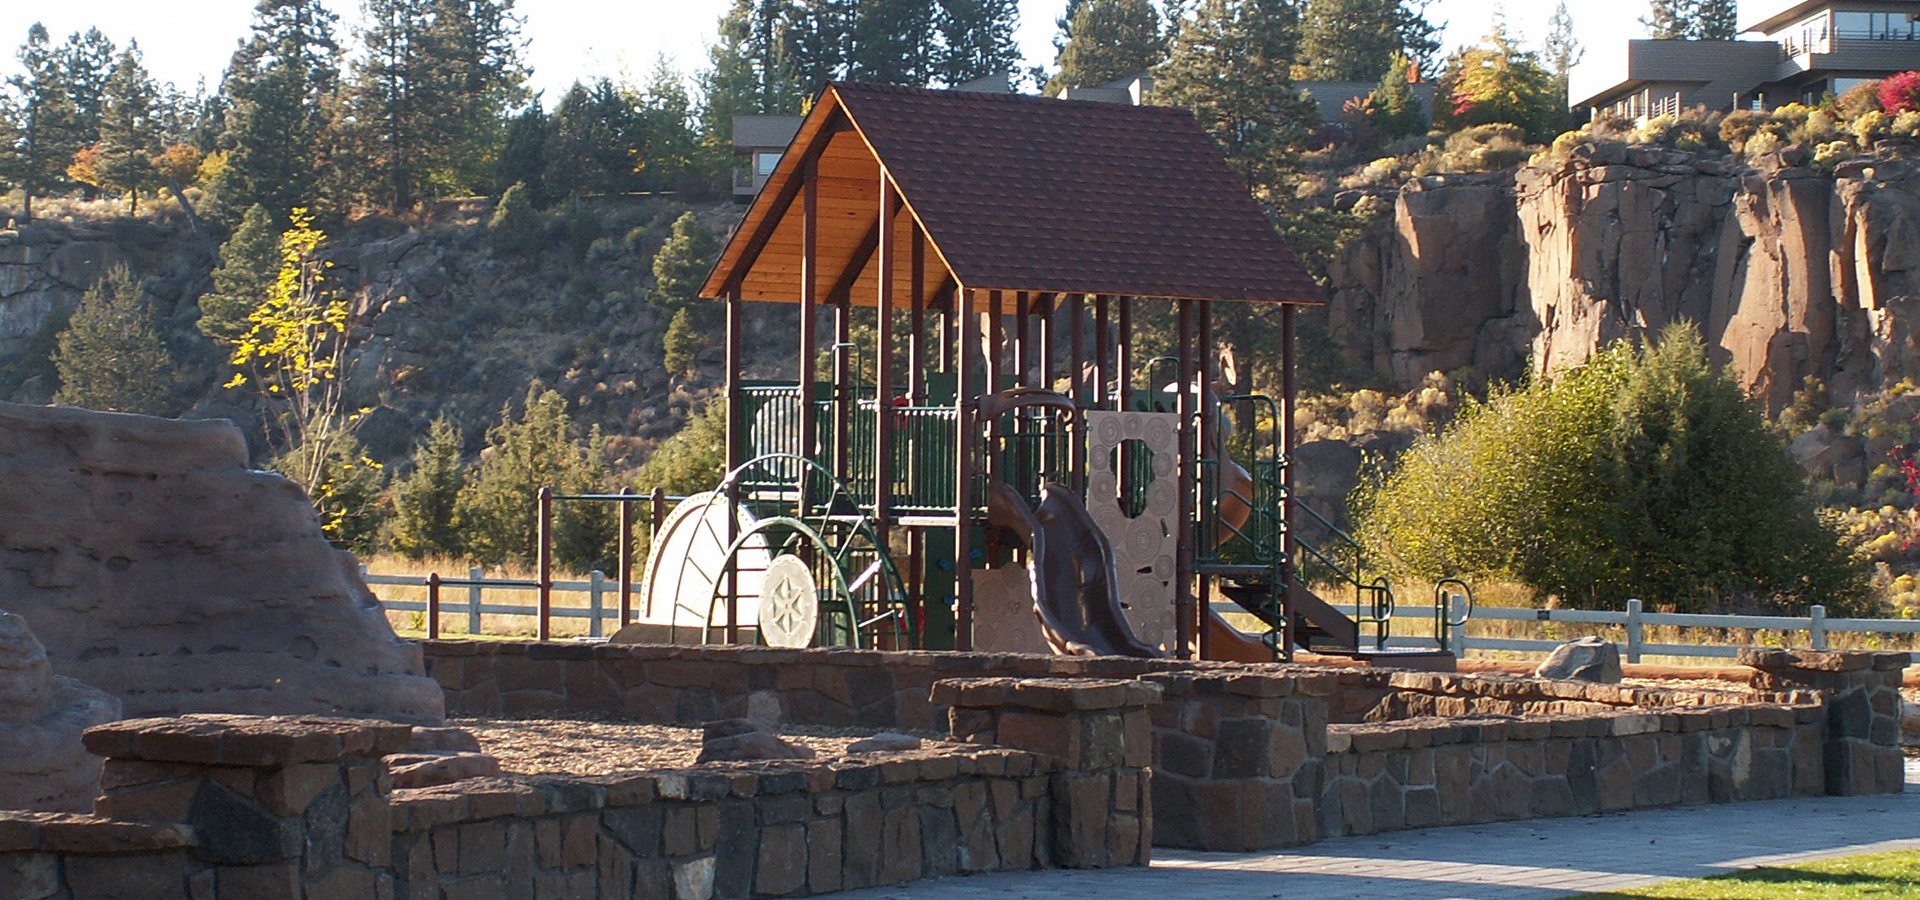 The Farewell Bend Park play structure.